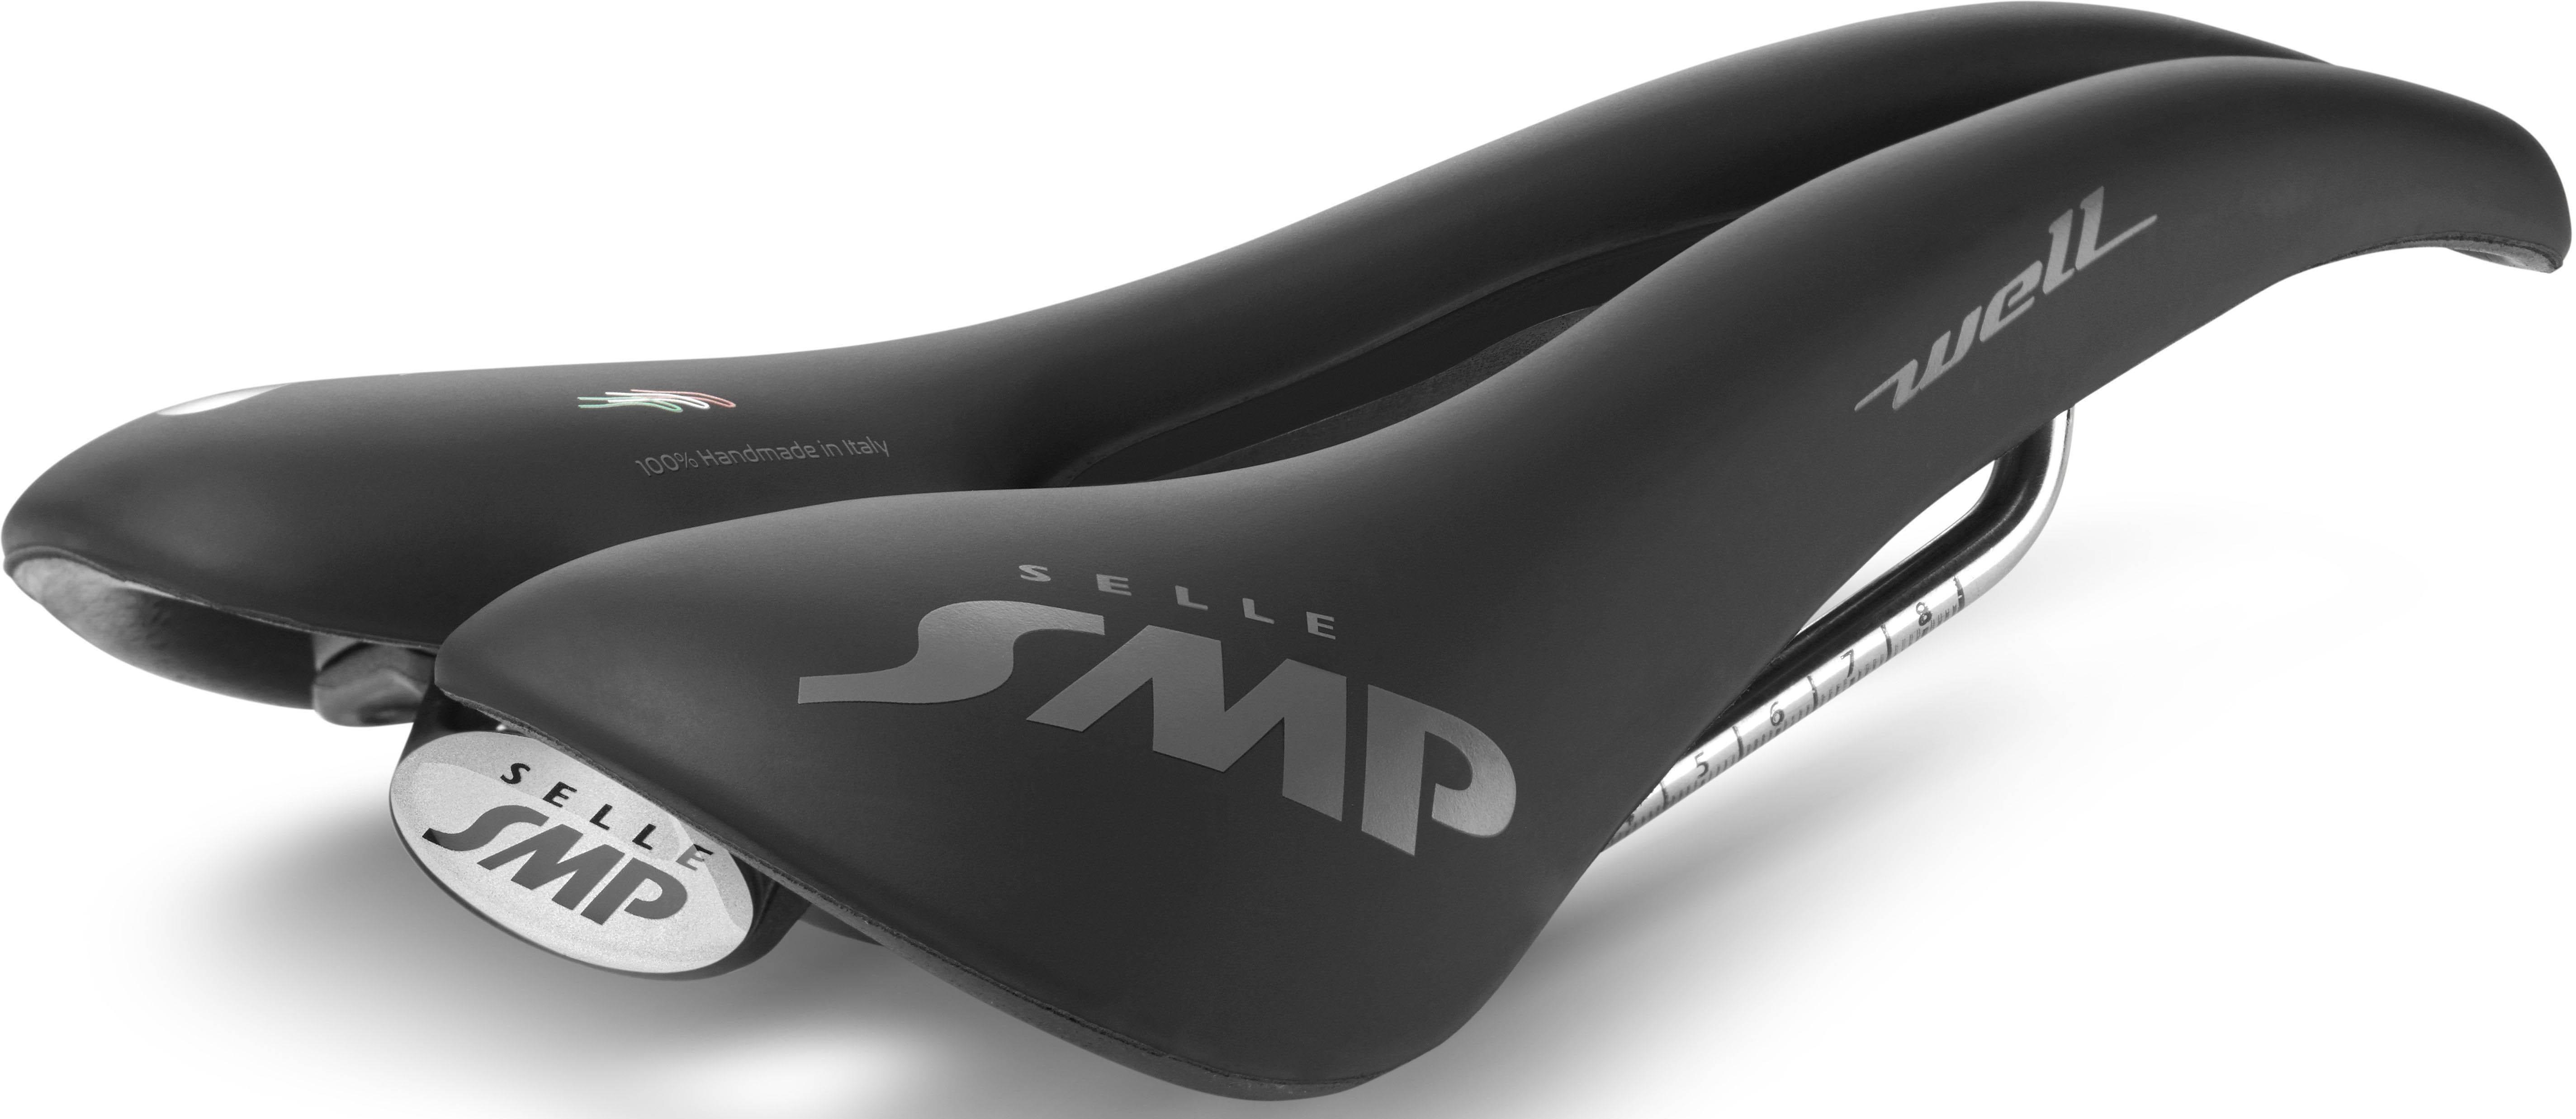 Selle Smp Well Saddle, Black